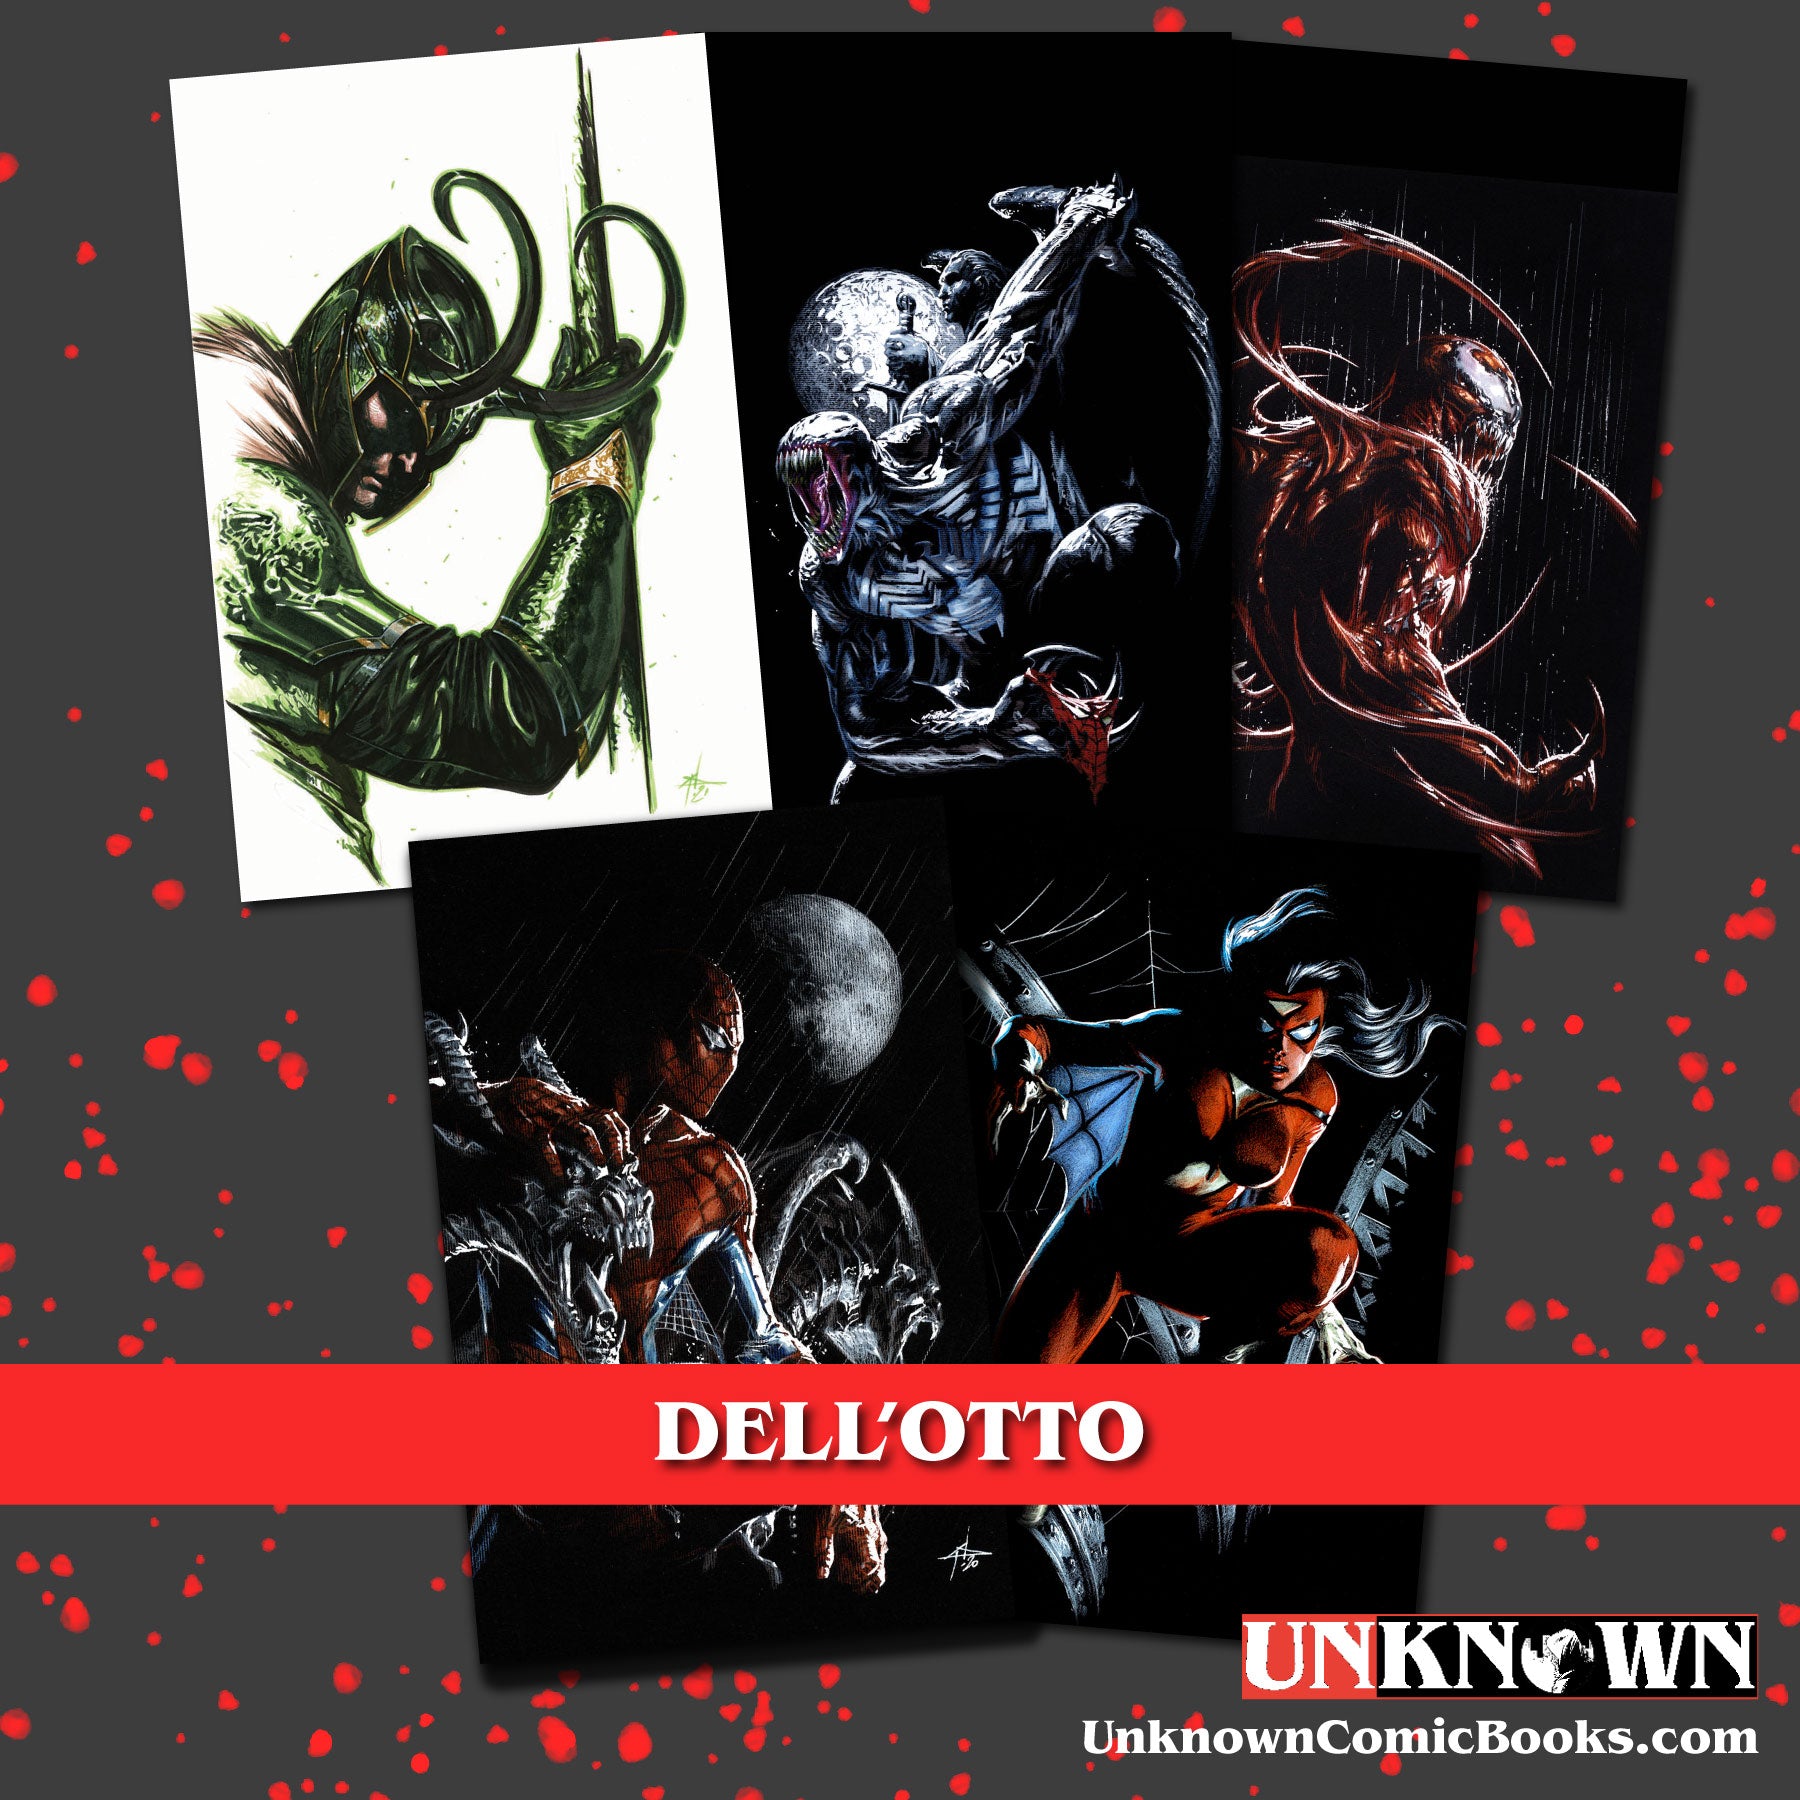 [5 PACK] UNKNOWN COMICS MYSTERY THEMED 👉🎨DELL'OTTO ARTIST EXCLUSIVE BOX 👉VIRGIN (12/21/2022)